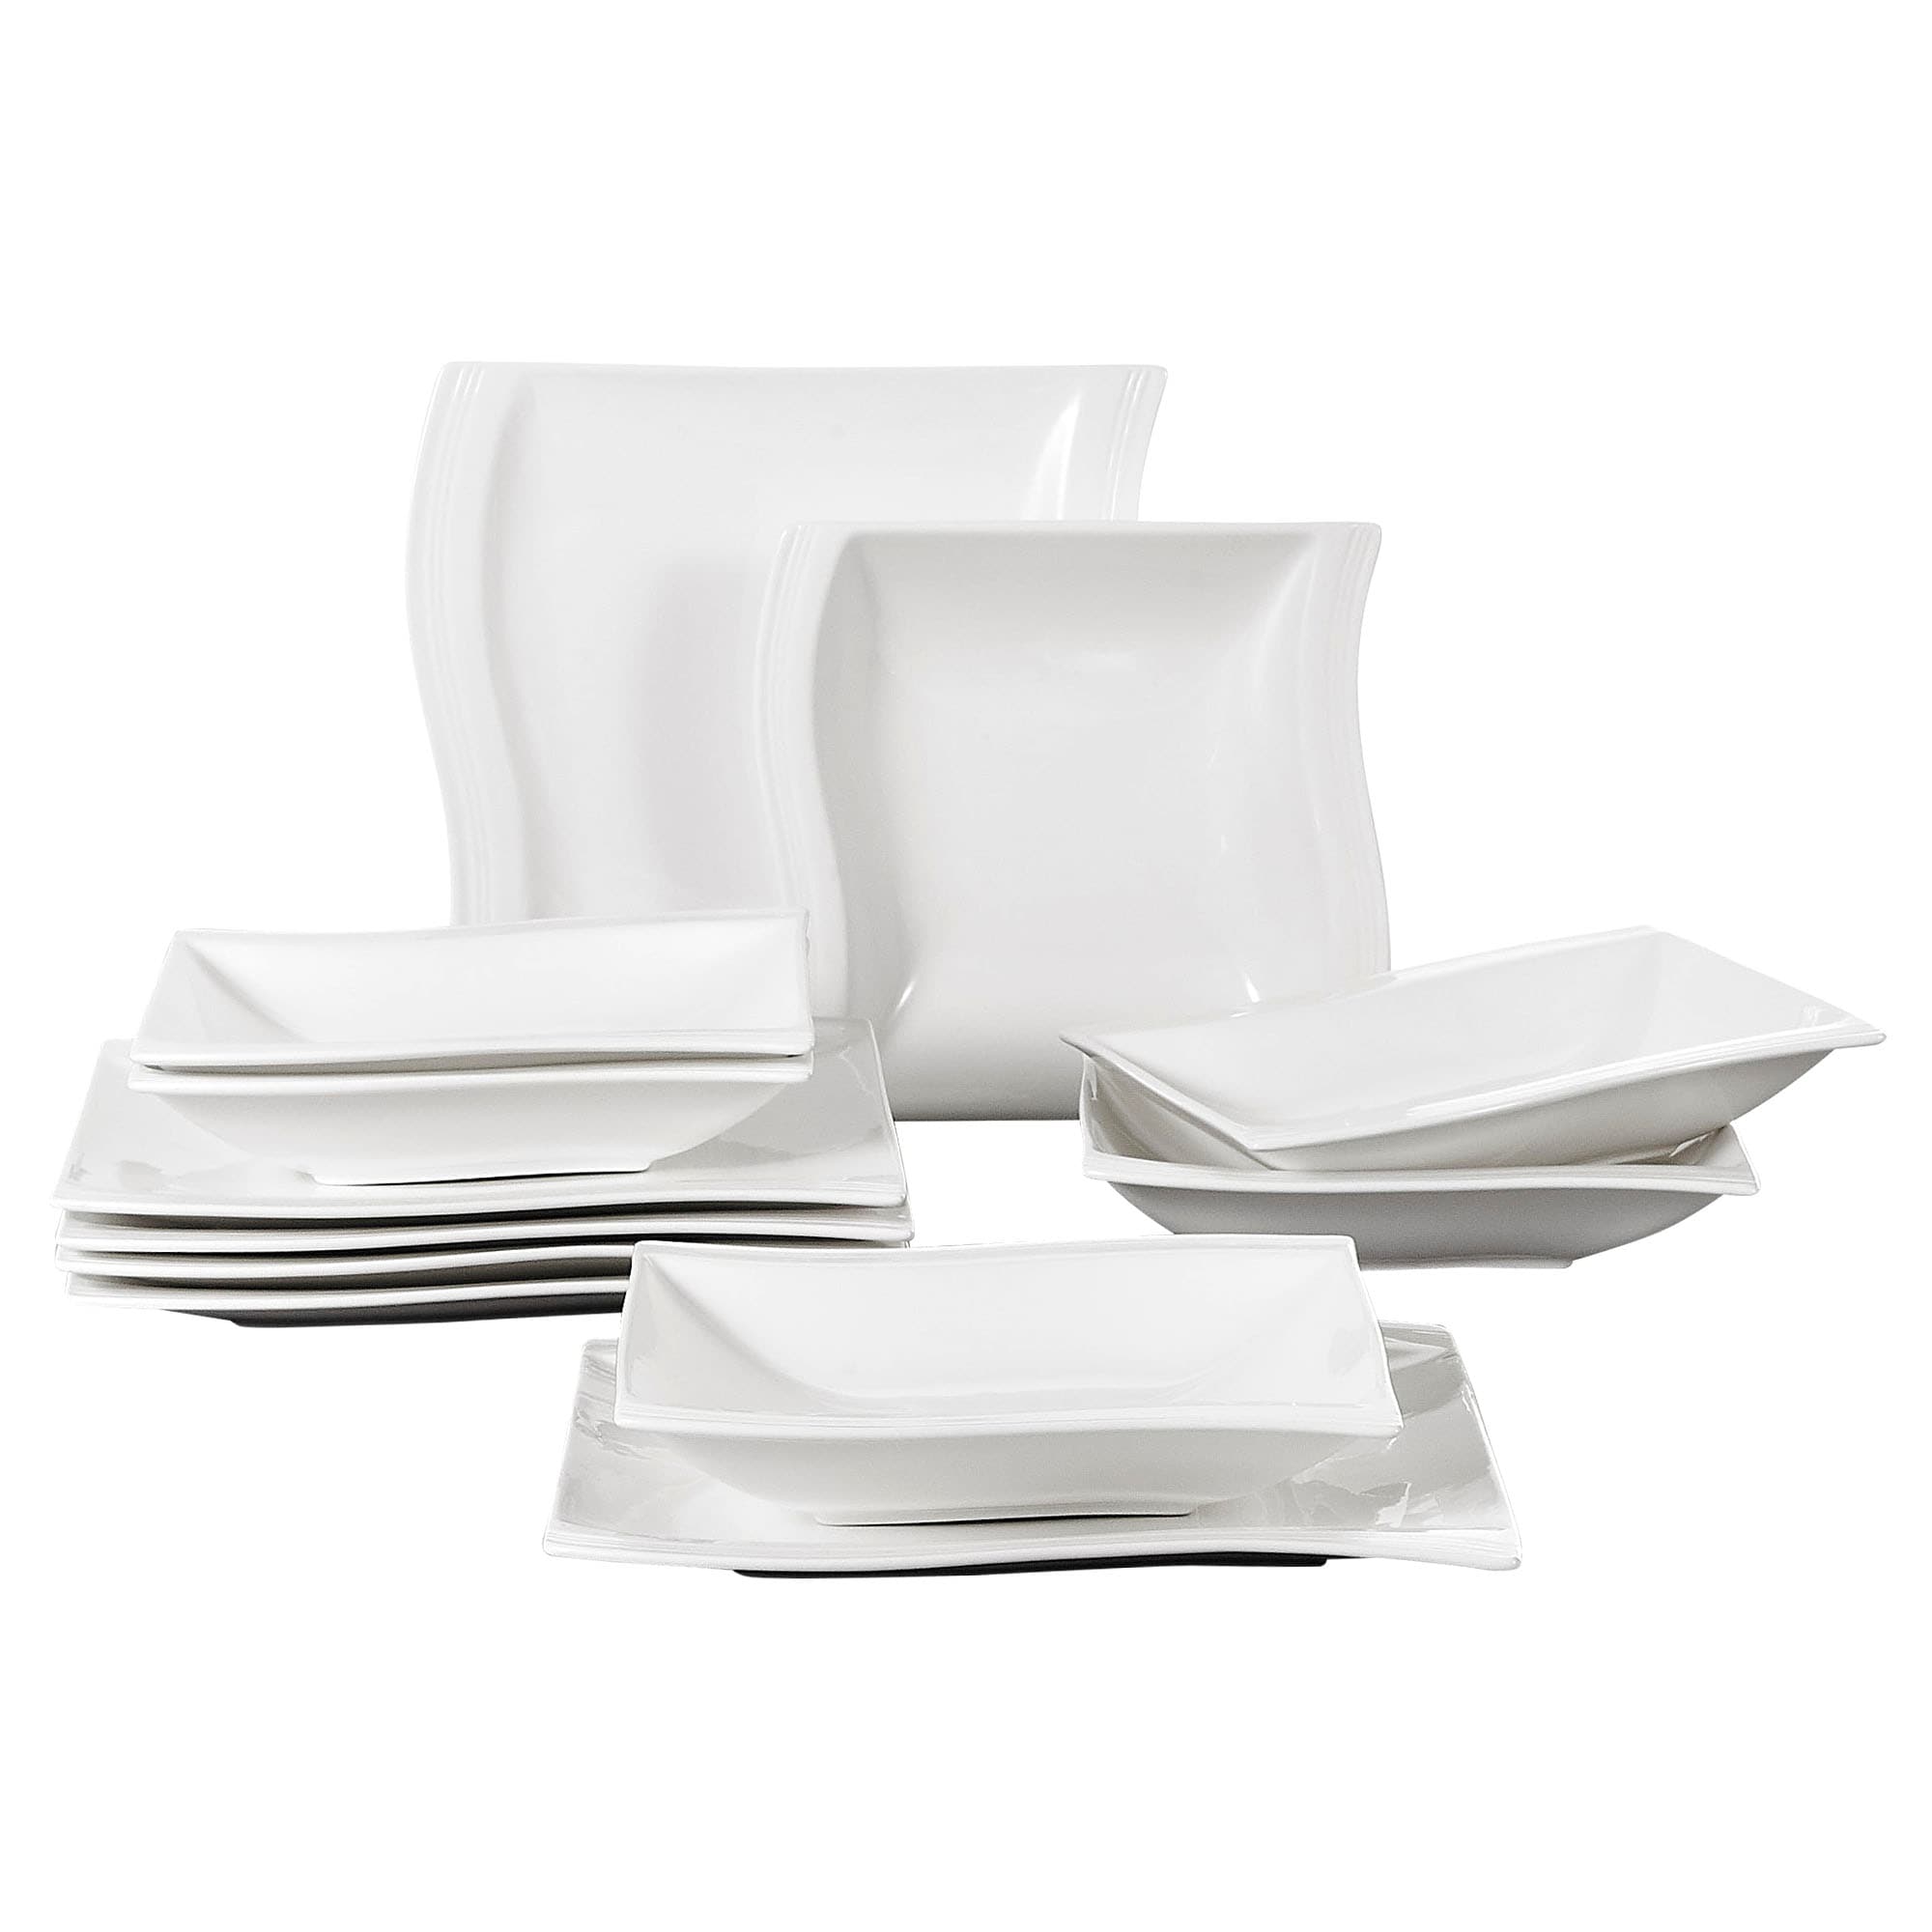 Series Carina 24 Piece Porcelain Plates Sets with 12 Soup Dinner